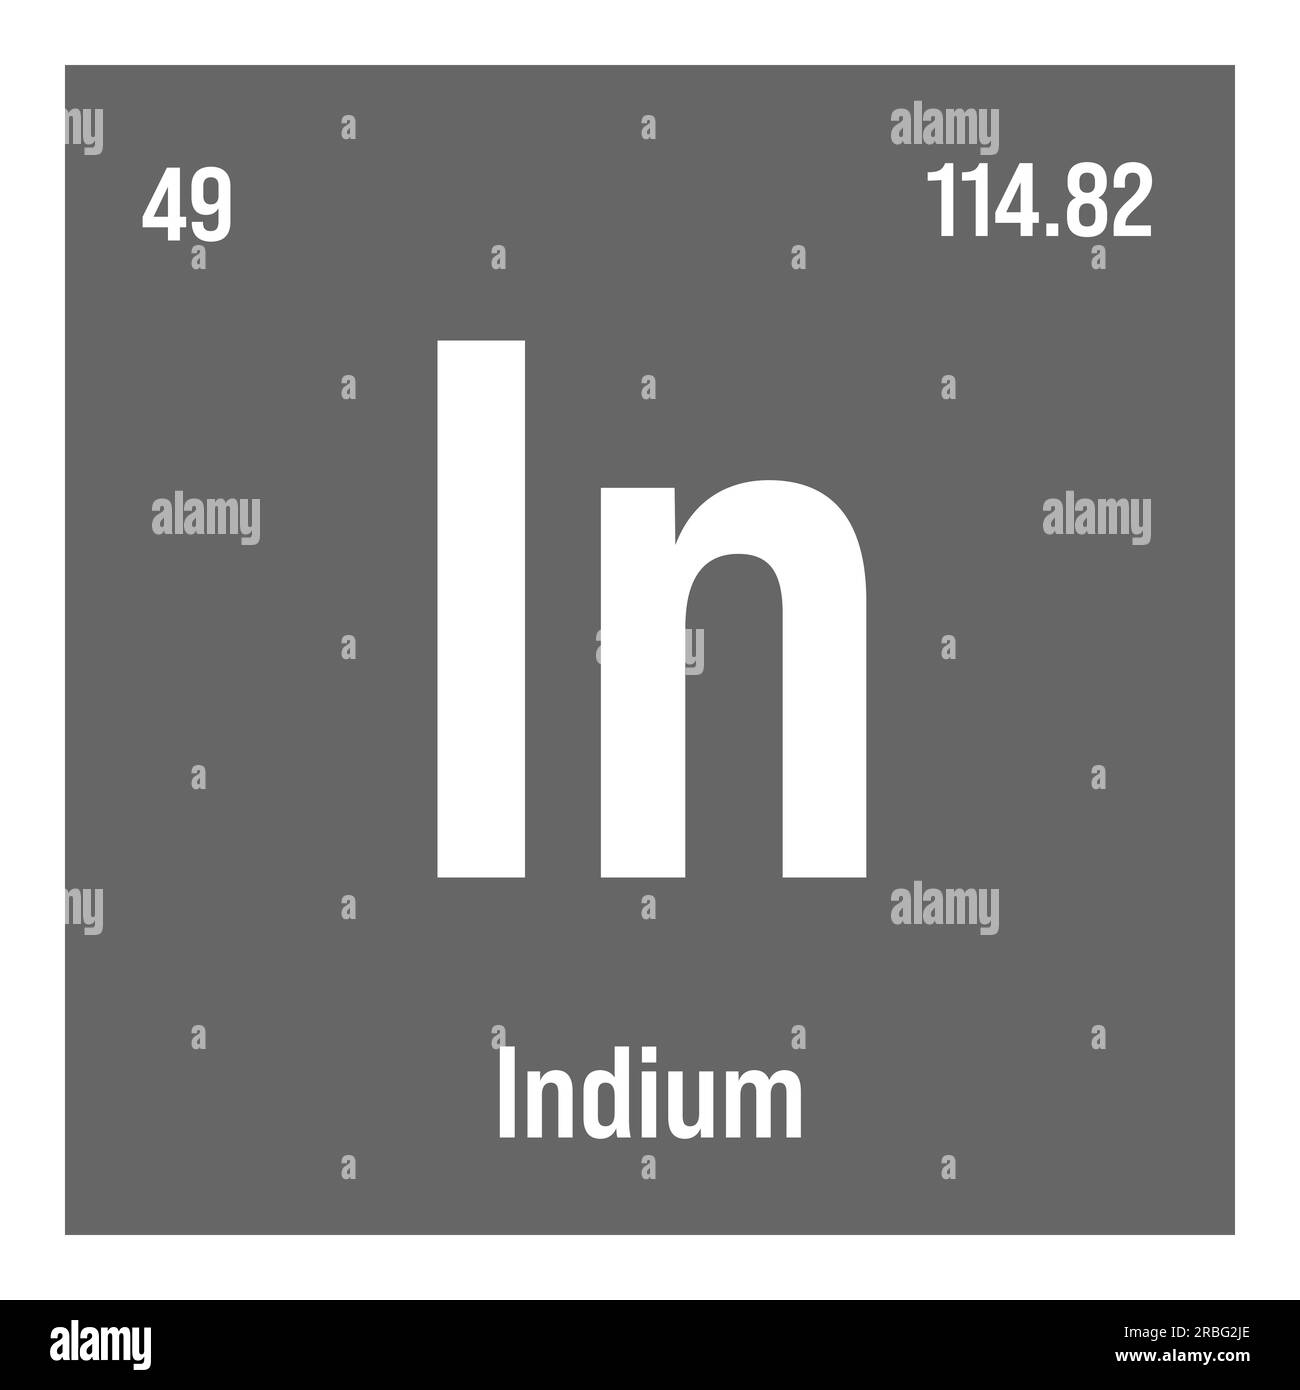 Indium, In, periodic table element with name, symbol, atomic number and weight. Metal with various industrial uses, such as in LCD screens, solar cells, and as a component of certain alloys. Stock Vector